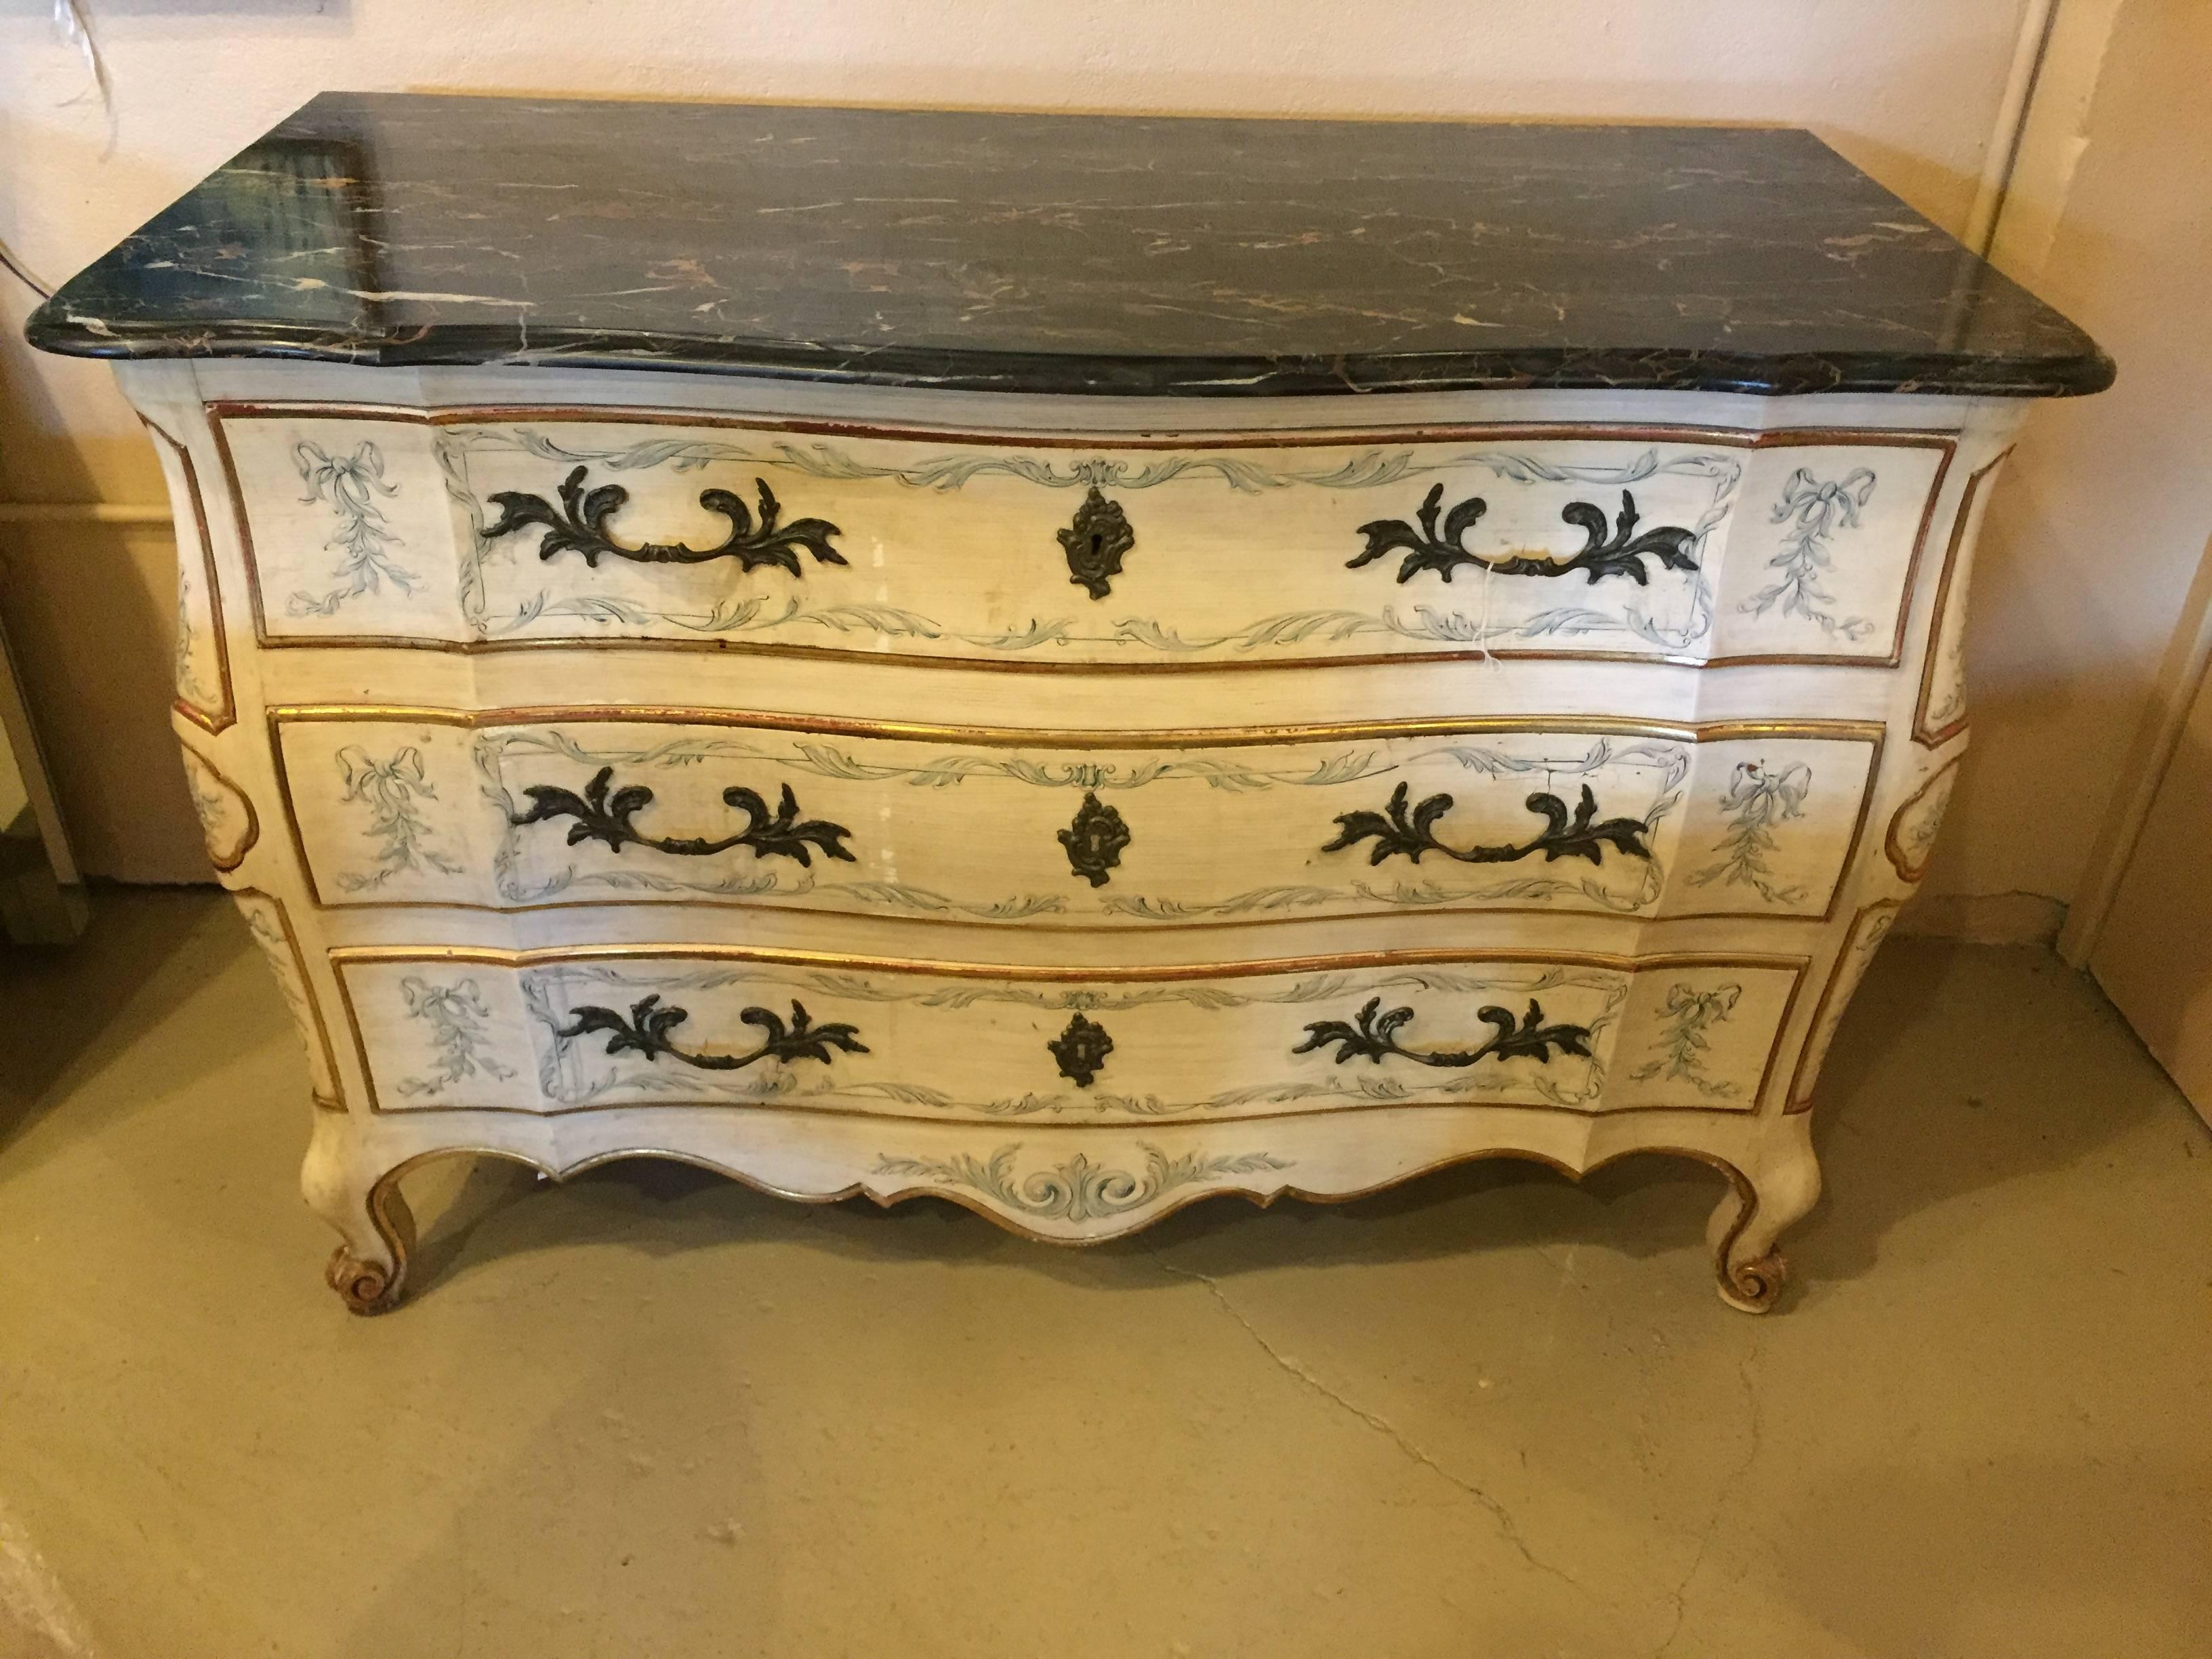 John Widdicomb made in England pair of painted Bombe marble-top chests. Each chest with oak secondaries in the Louis XV Fashion having painted leaf, vine and scroll design on an off-white background. The locks marked Made in England the drawer sides